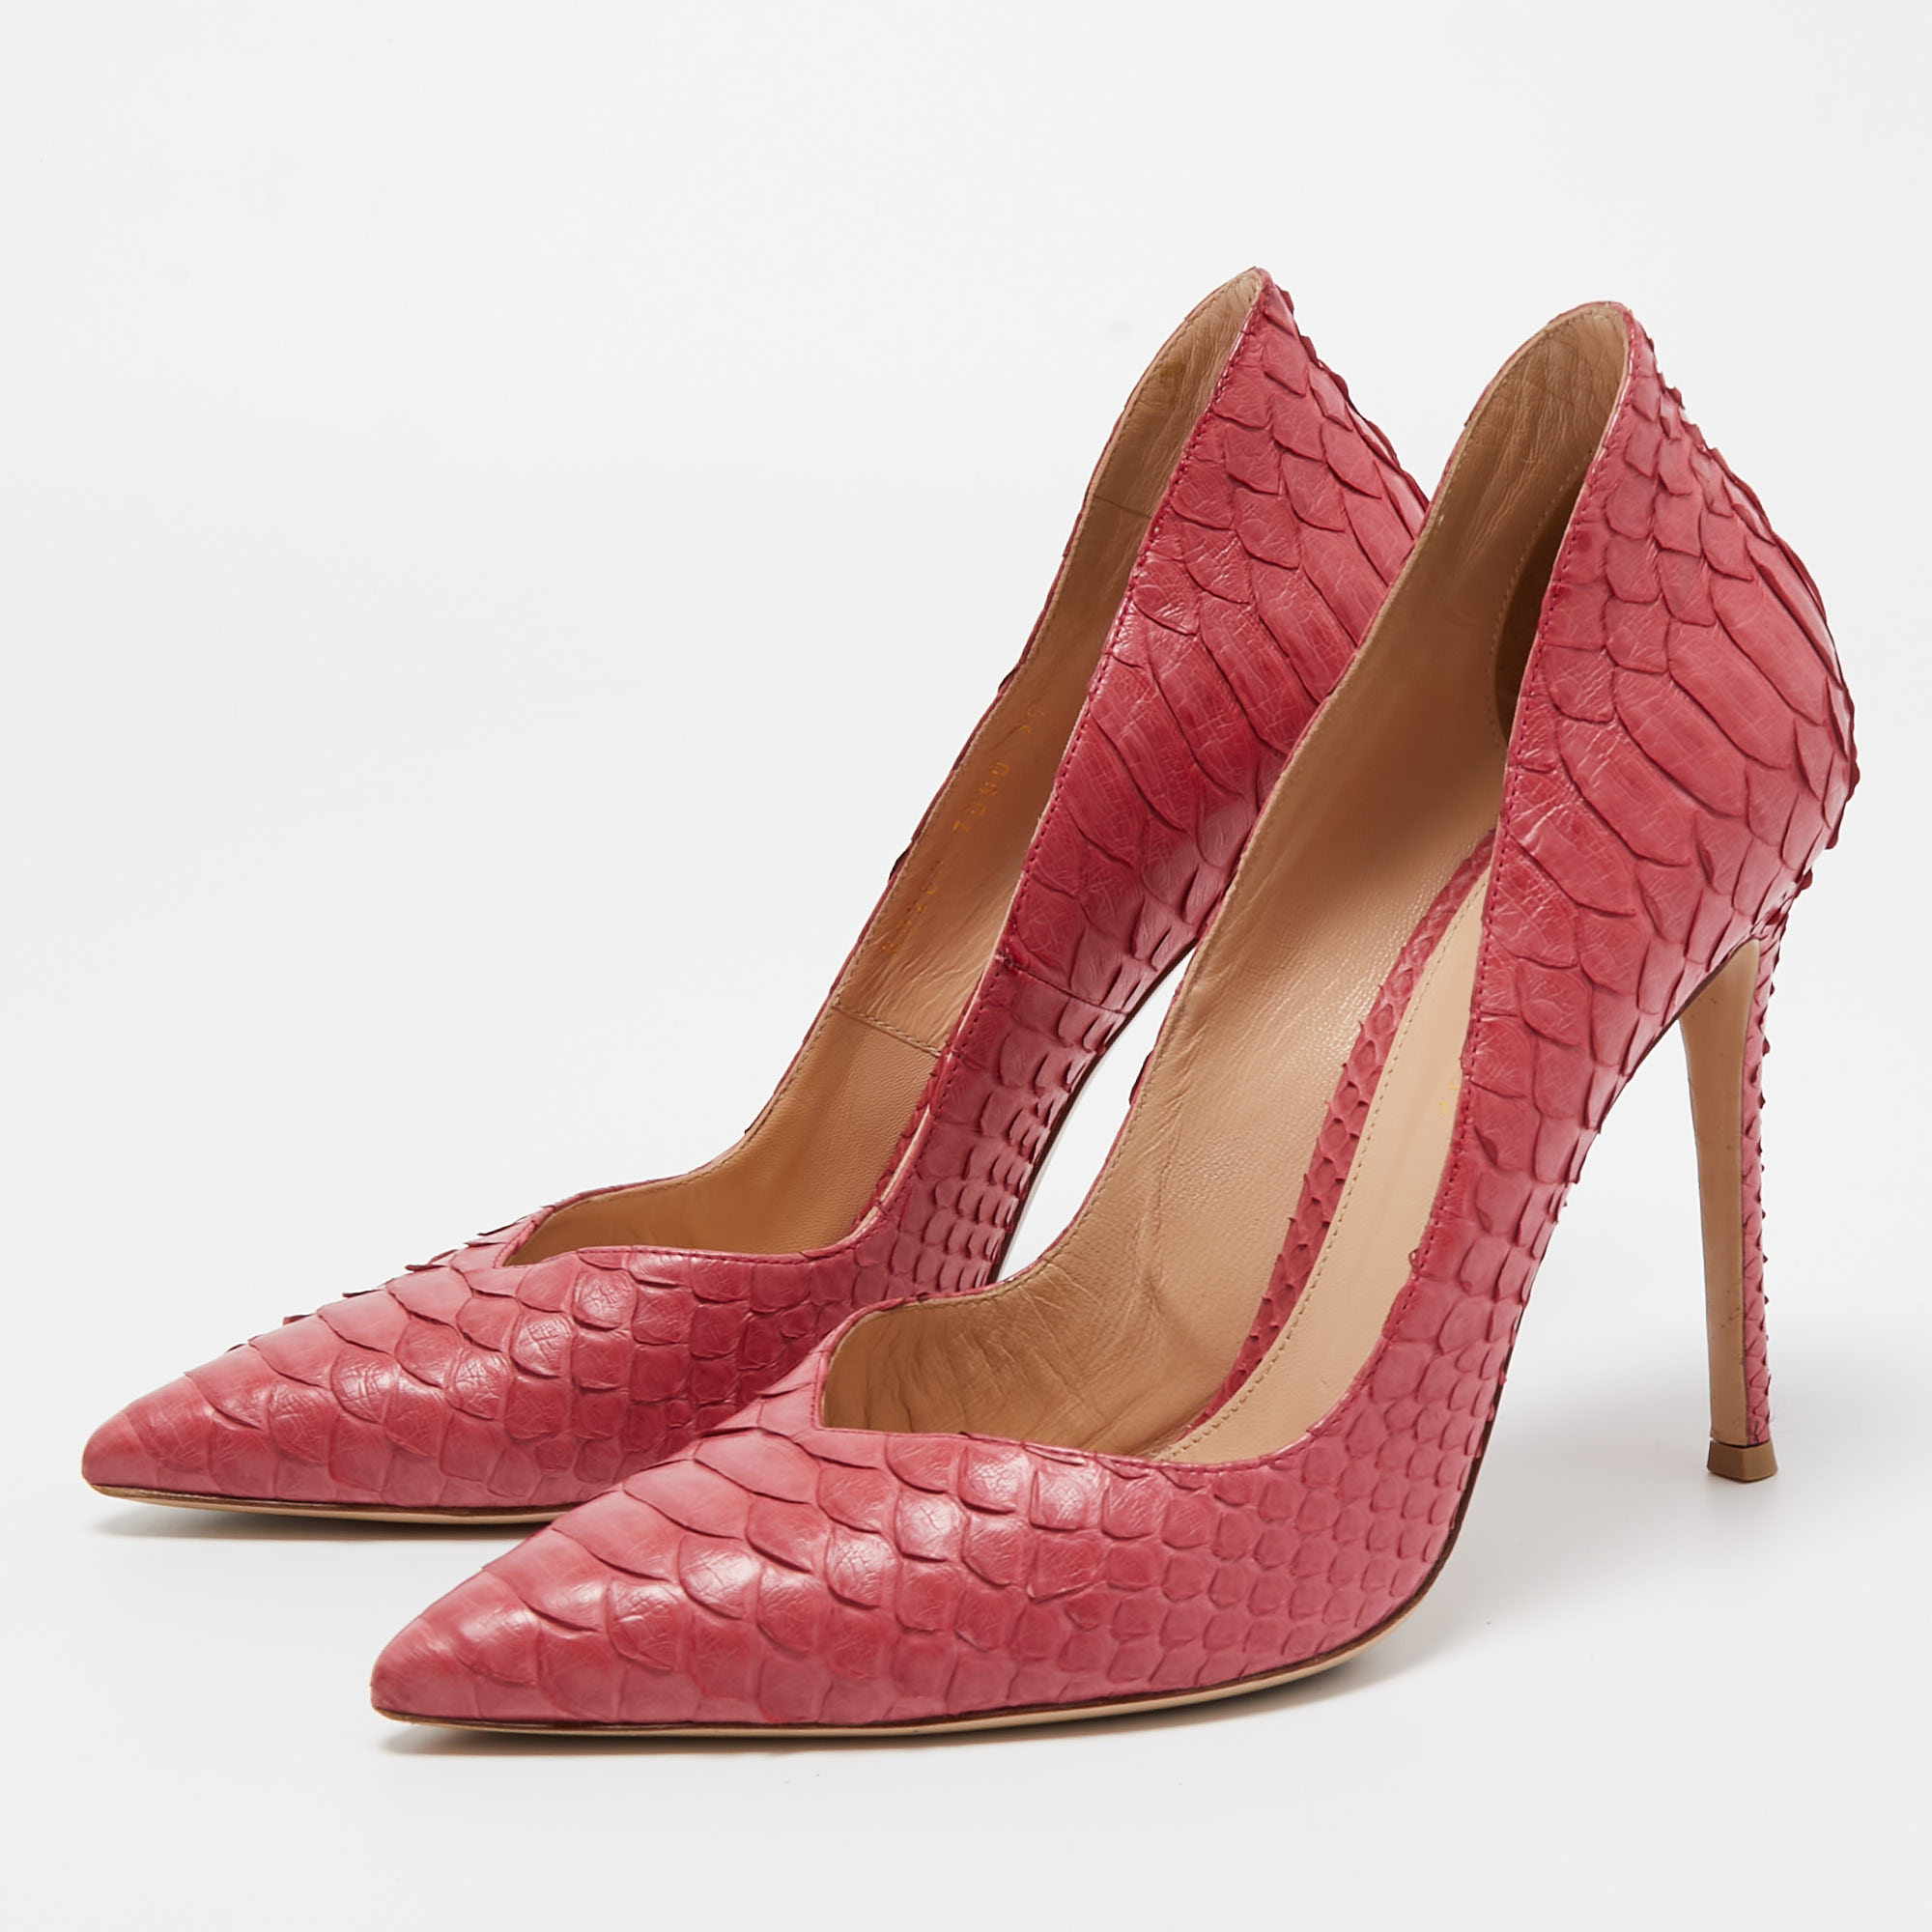 

Gianvito Rossi Pink Python Leather Pointed Toe Pumps Size